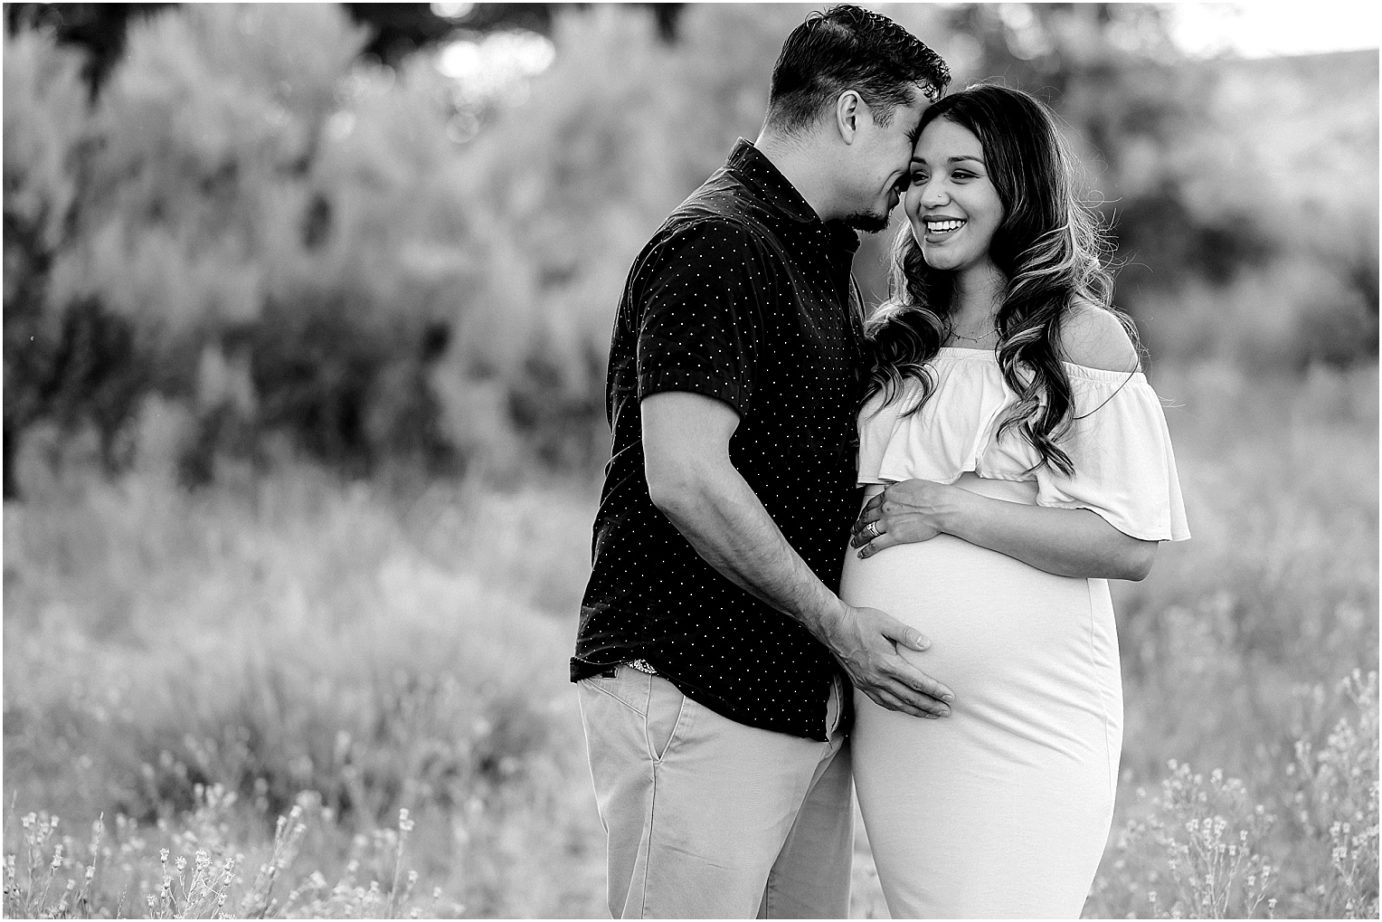 Desert Oasis Maternity Session Baby C mom and dad holding belly